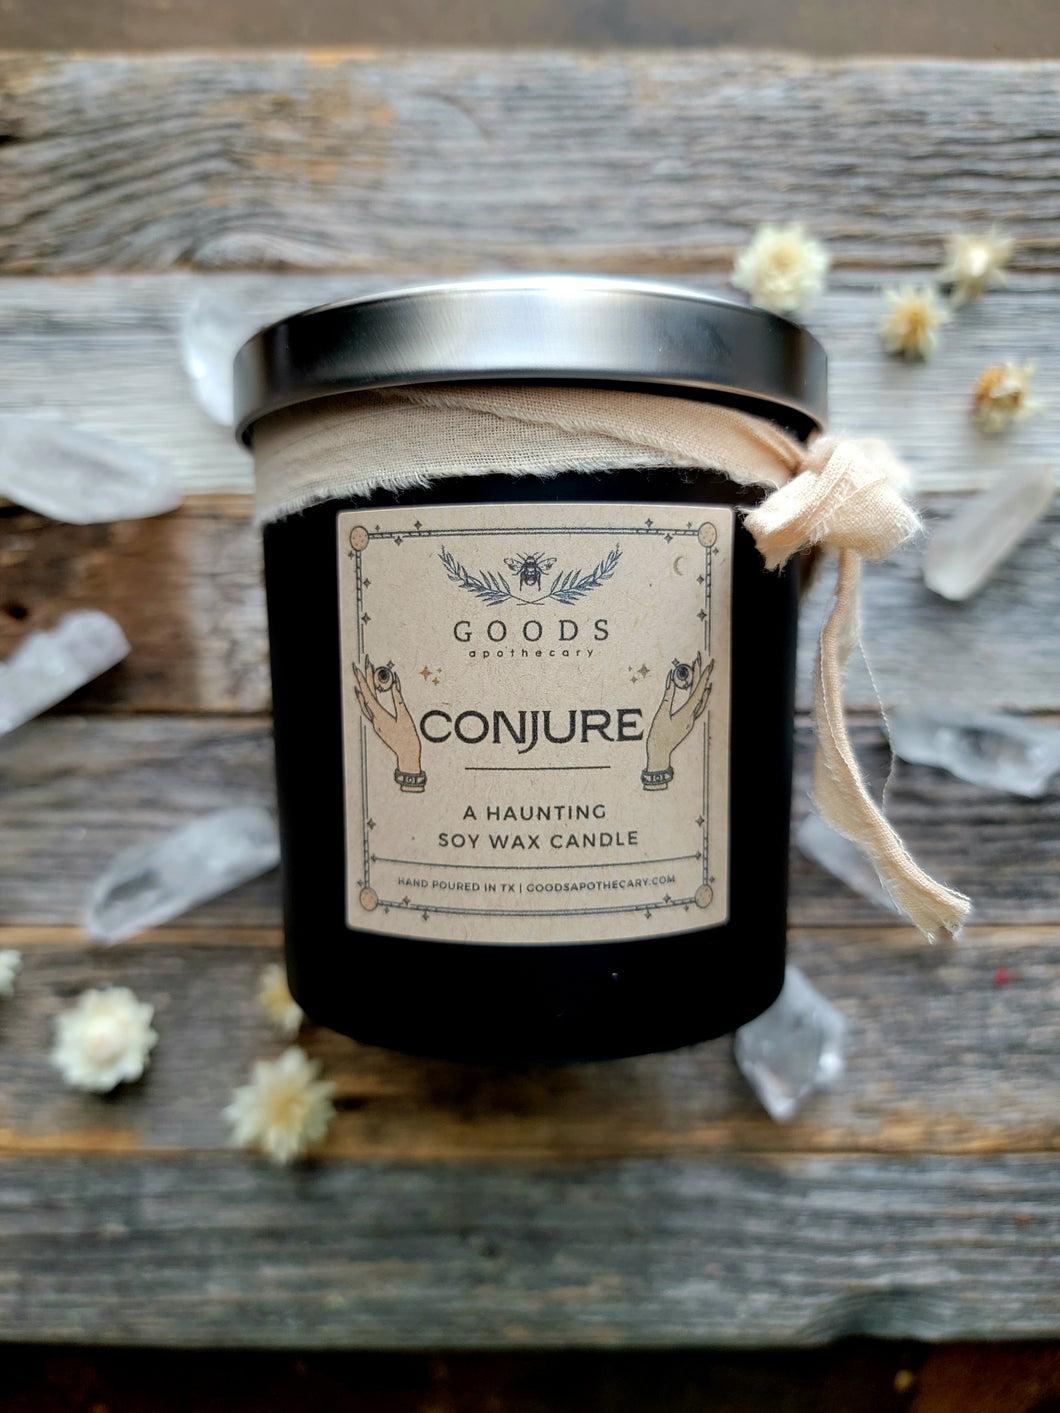 Conjure Candles & Wax Melts